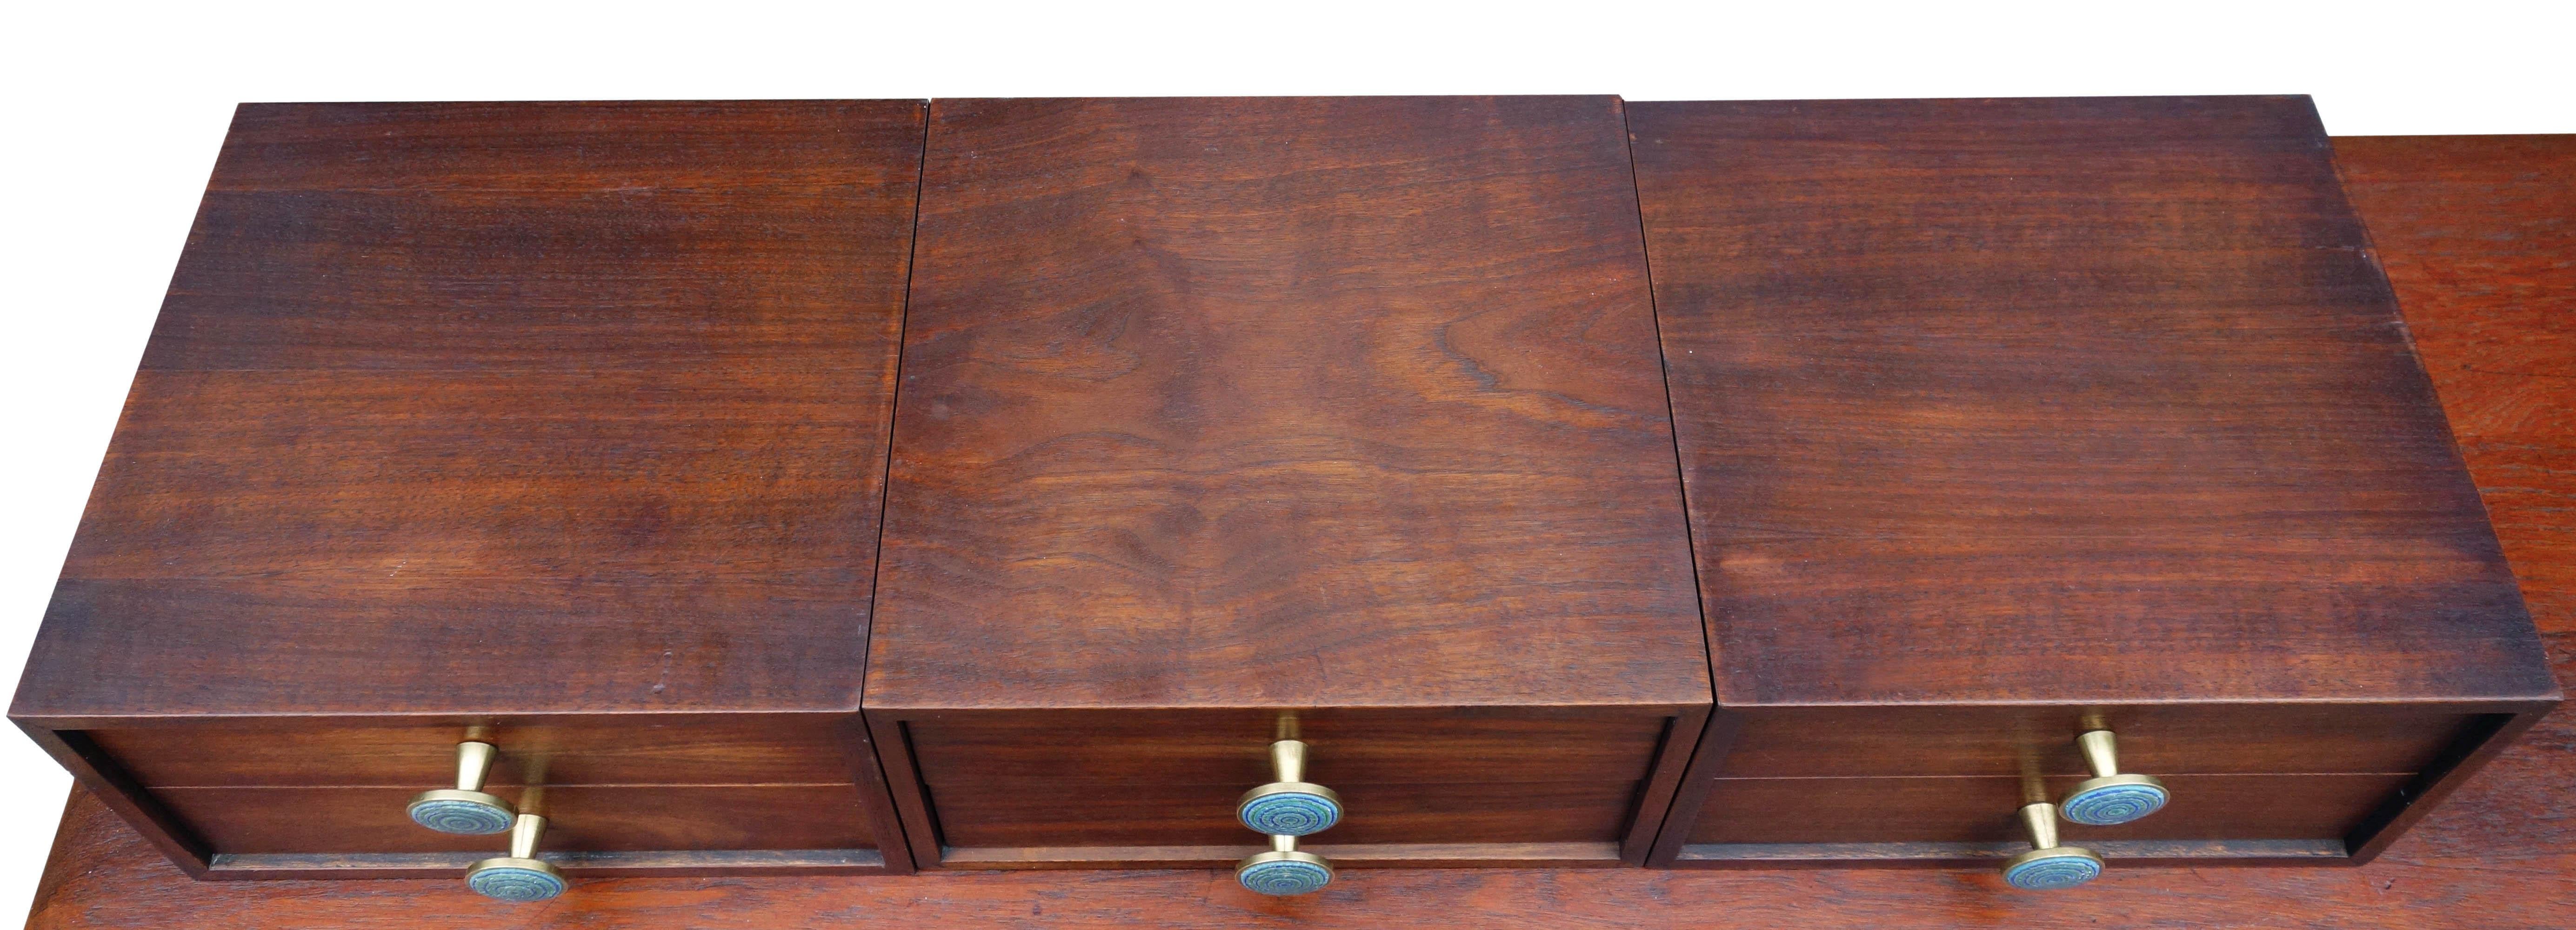 Midcentury Cabinet Top Set of Drawers For Sale 1